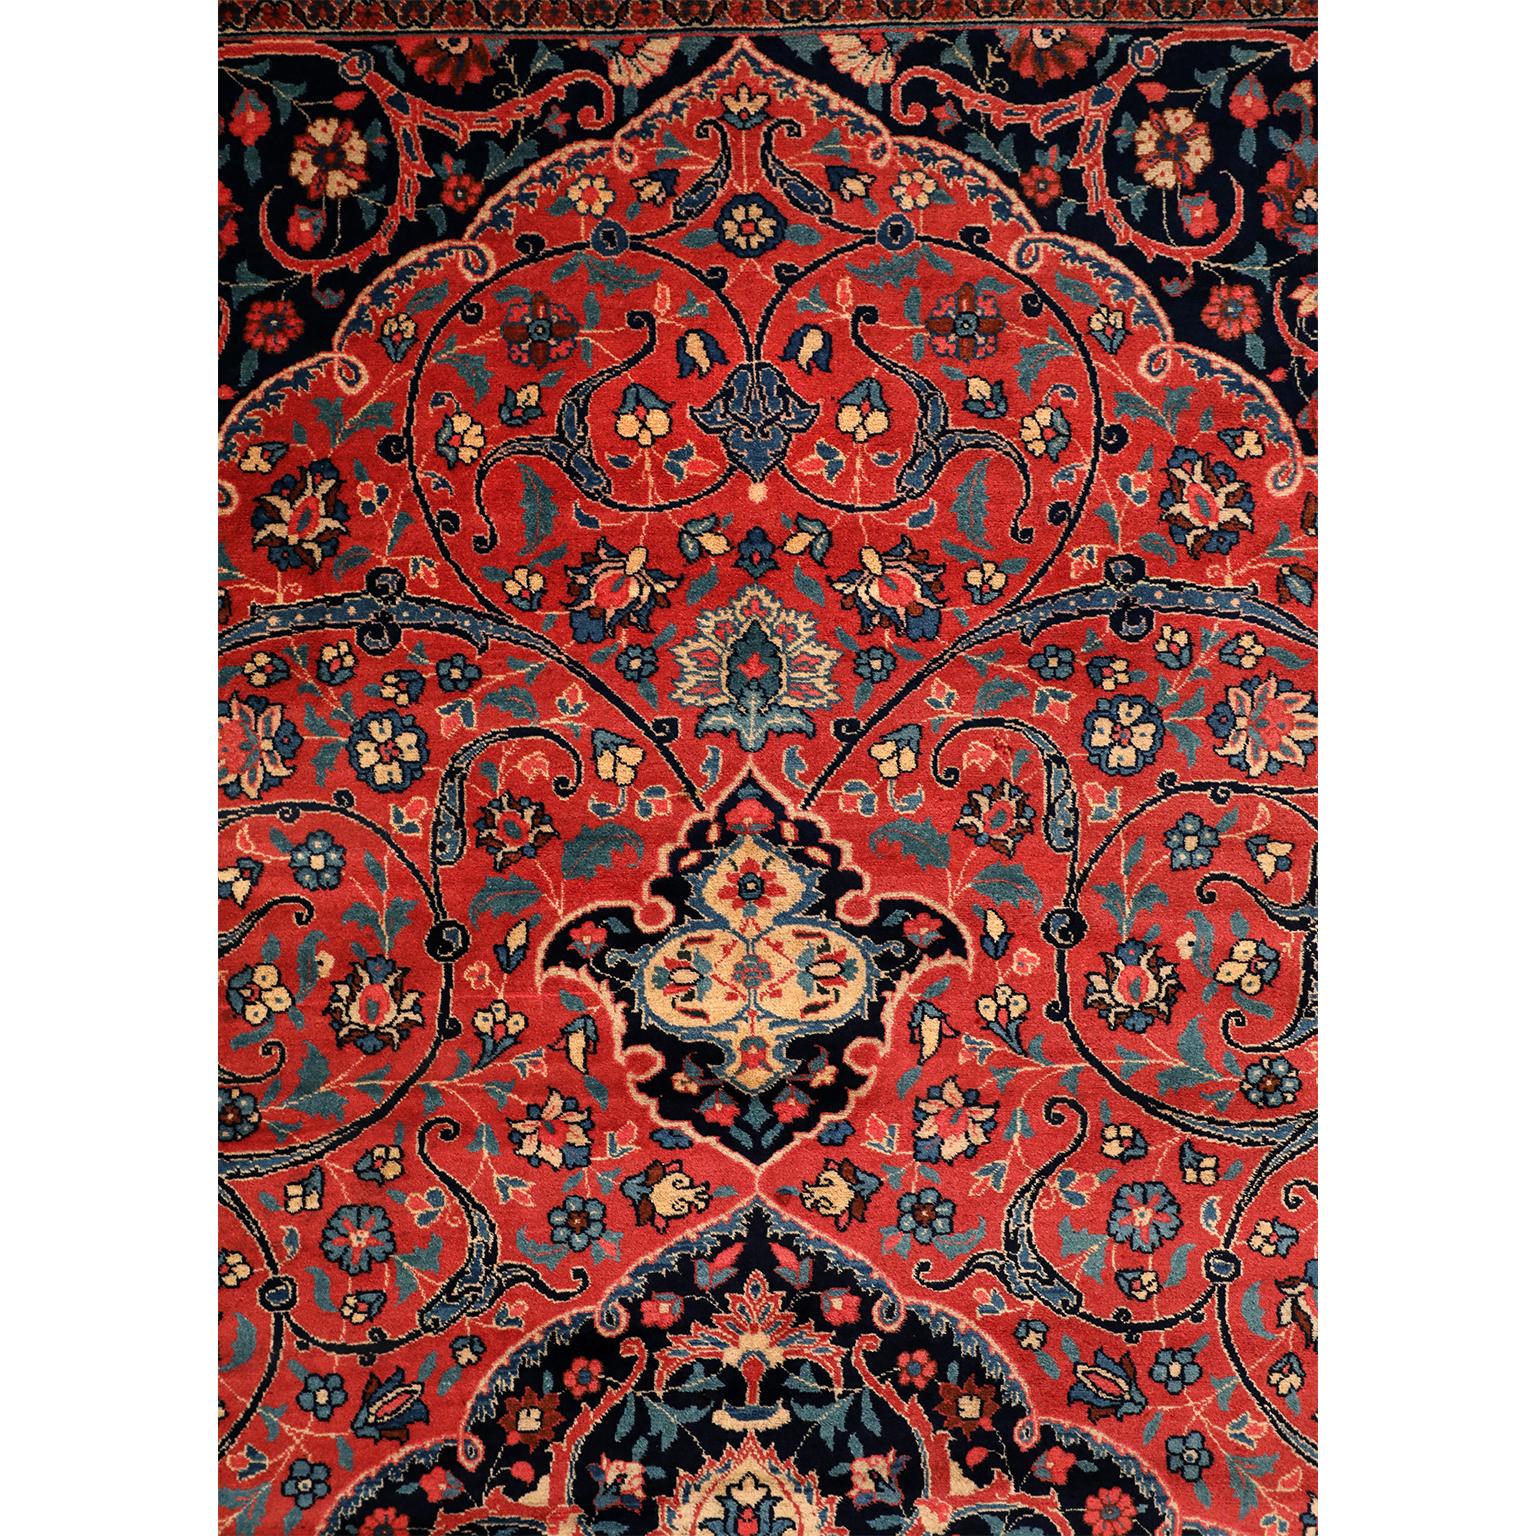 Vegetable Dyed Hand-knotted Antique 1920s Wool Persian Tabriz Rug, Red and Indigo, 11' x 15' For Sale